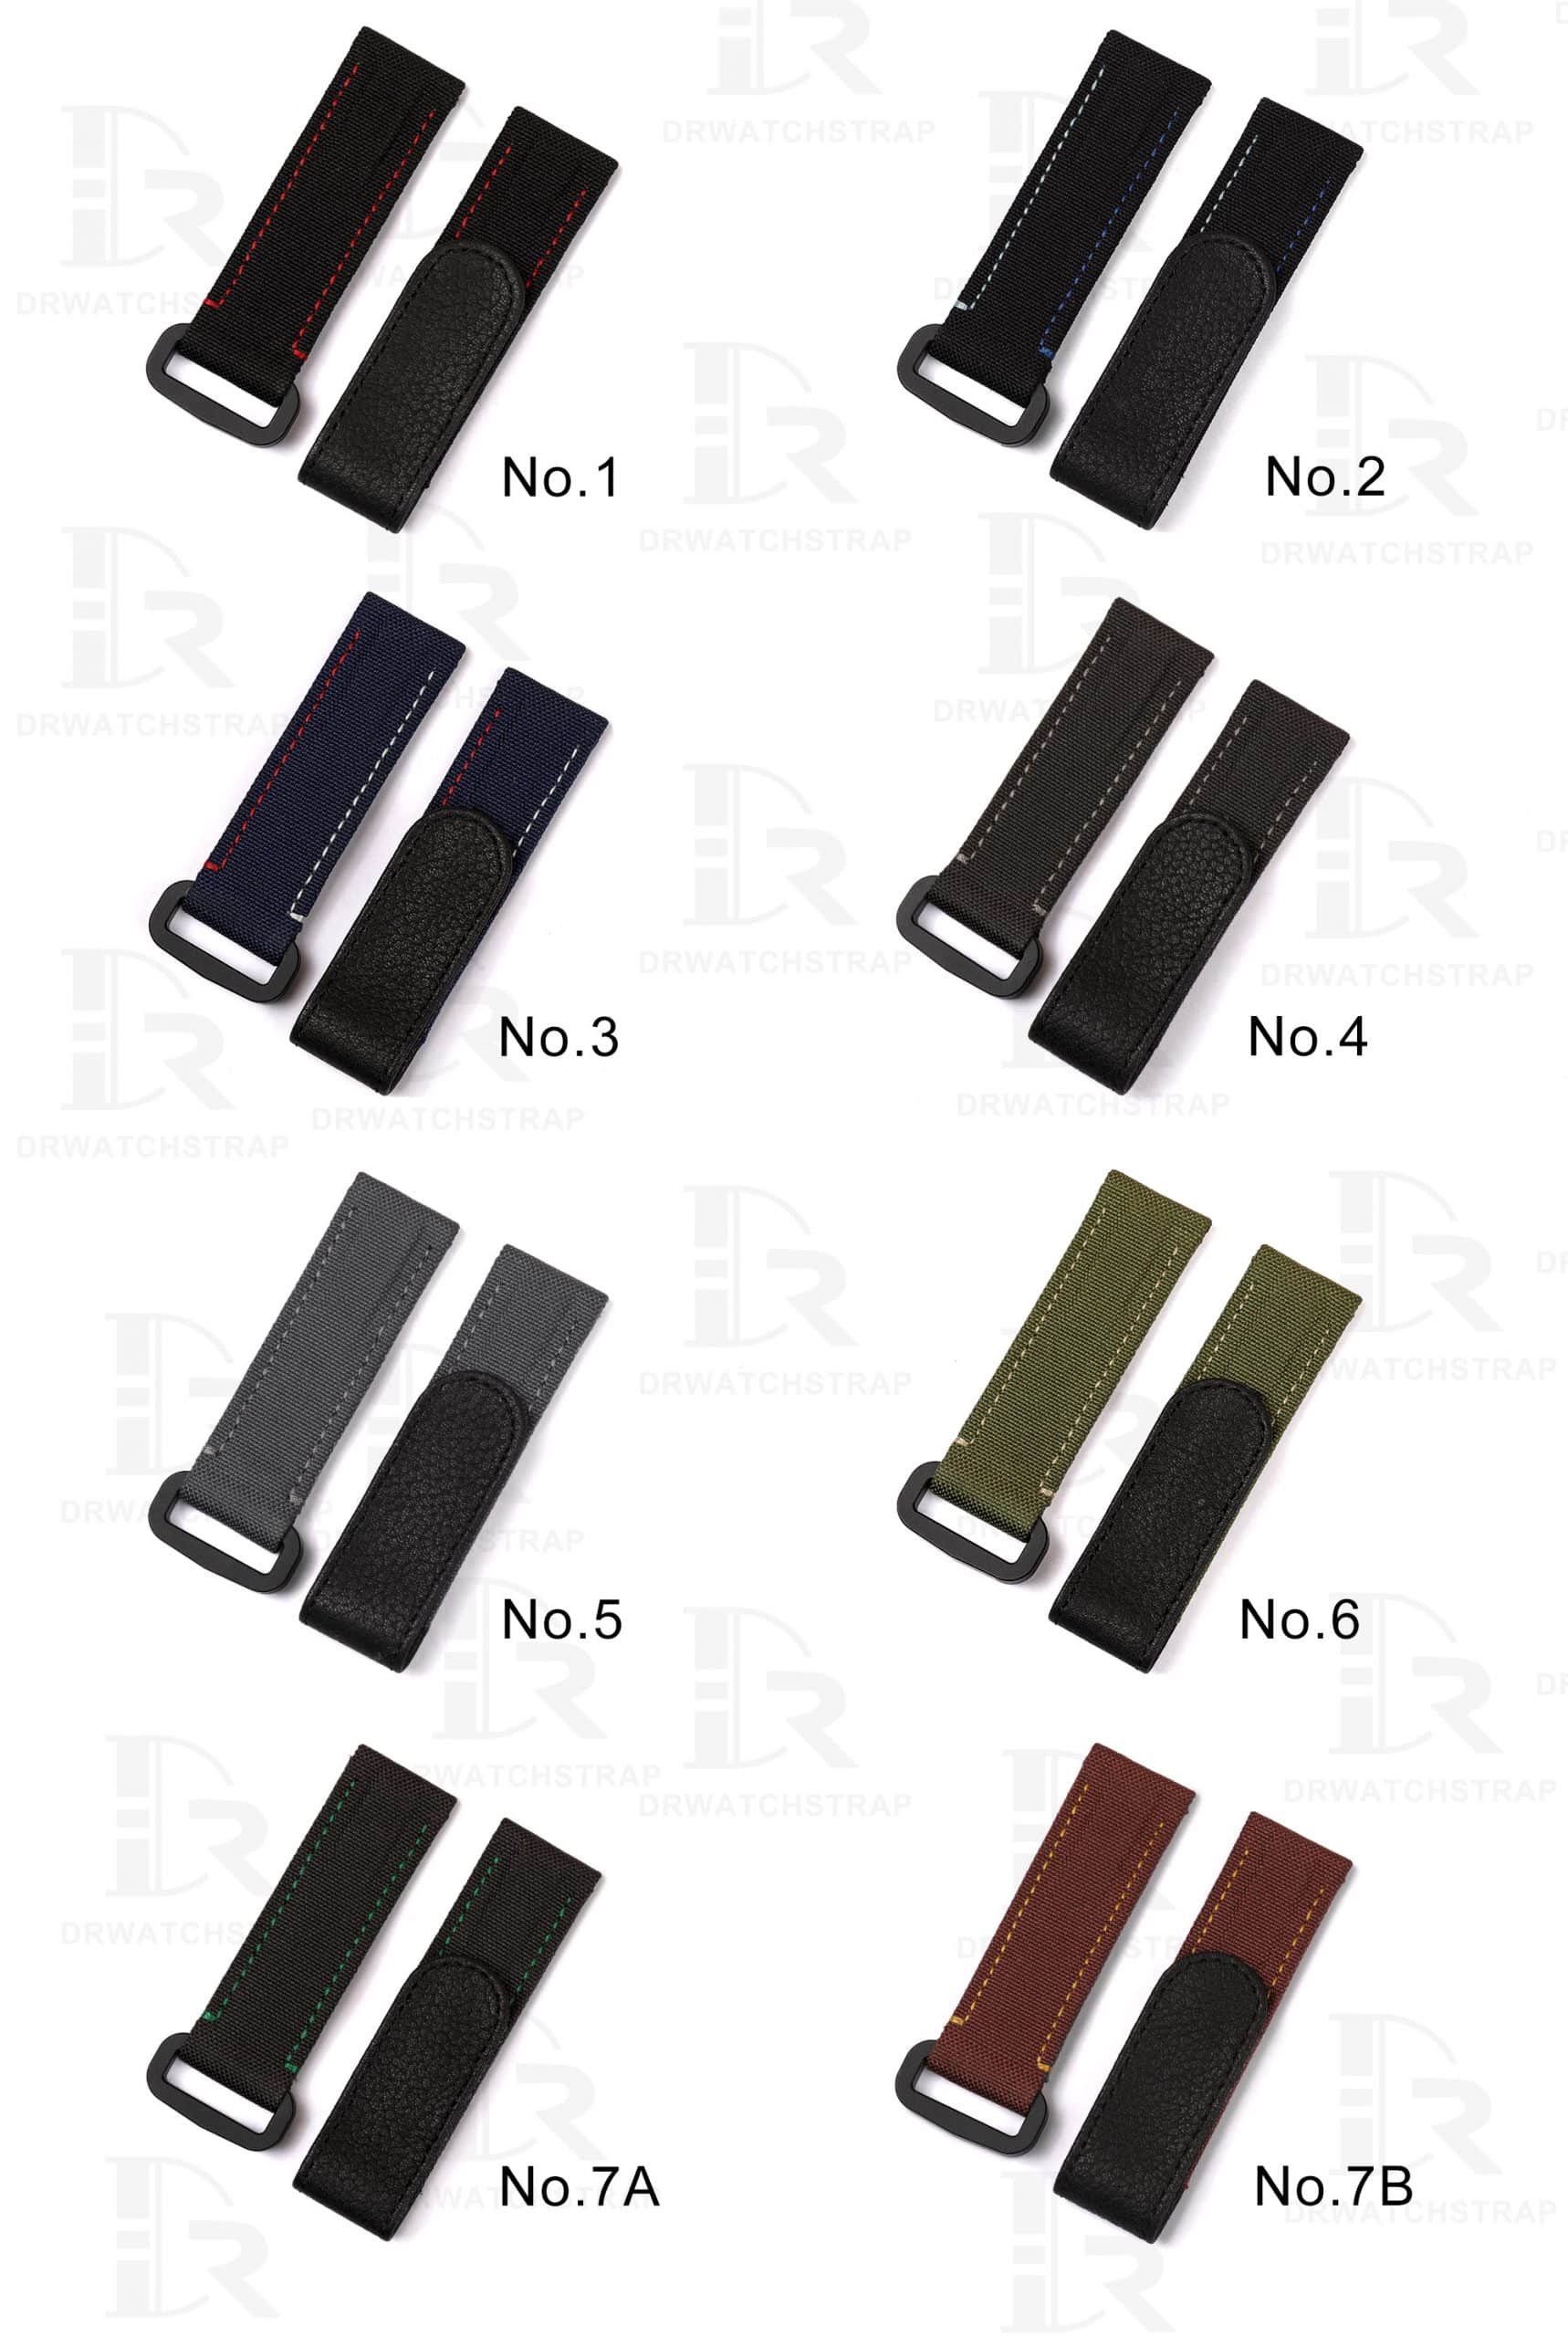 High quality custom velcro replacement made of premium nylon canvas kevlar material